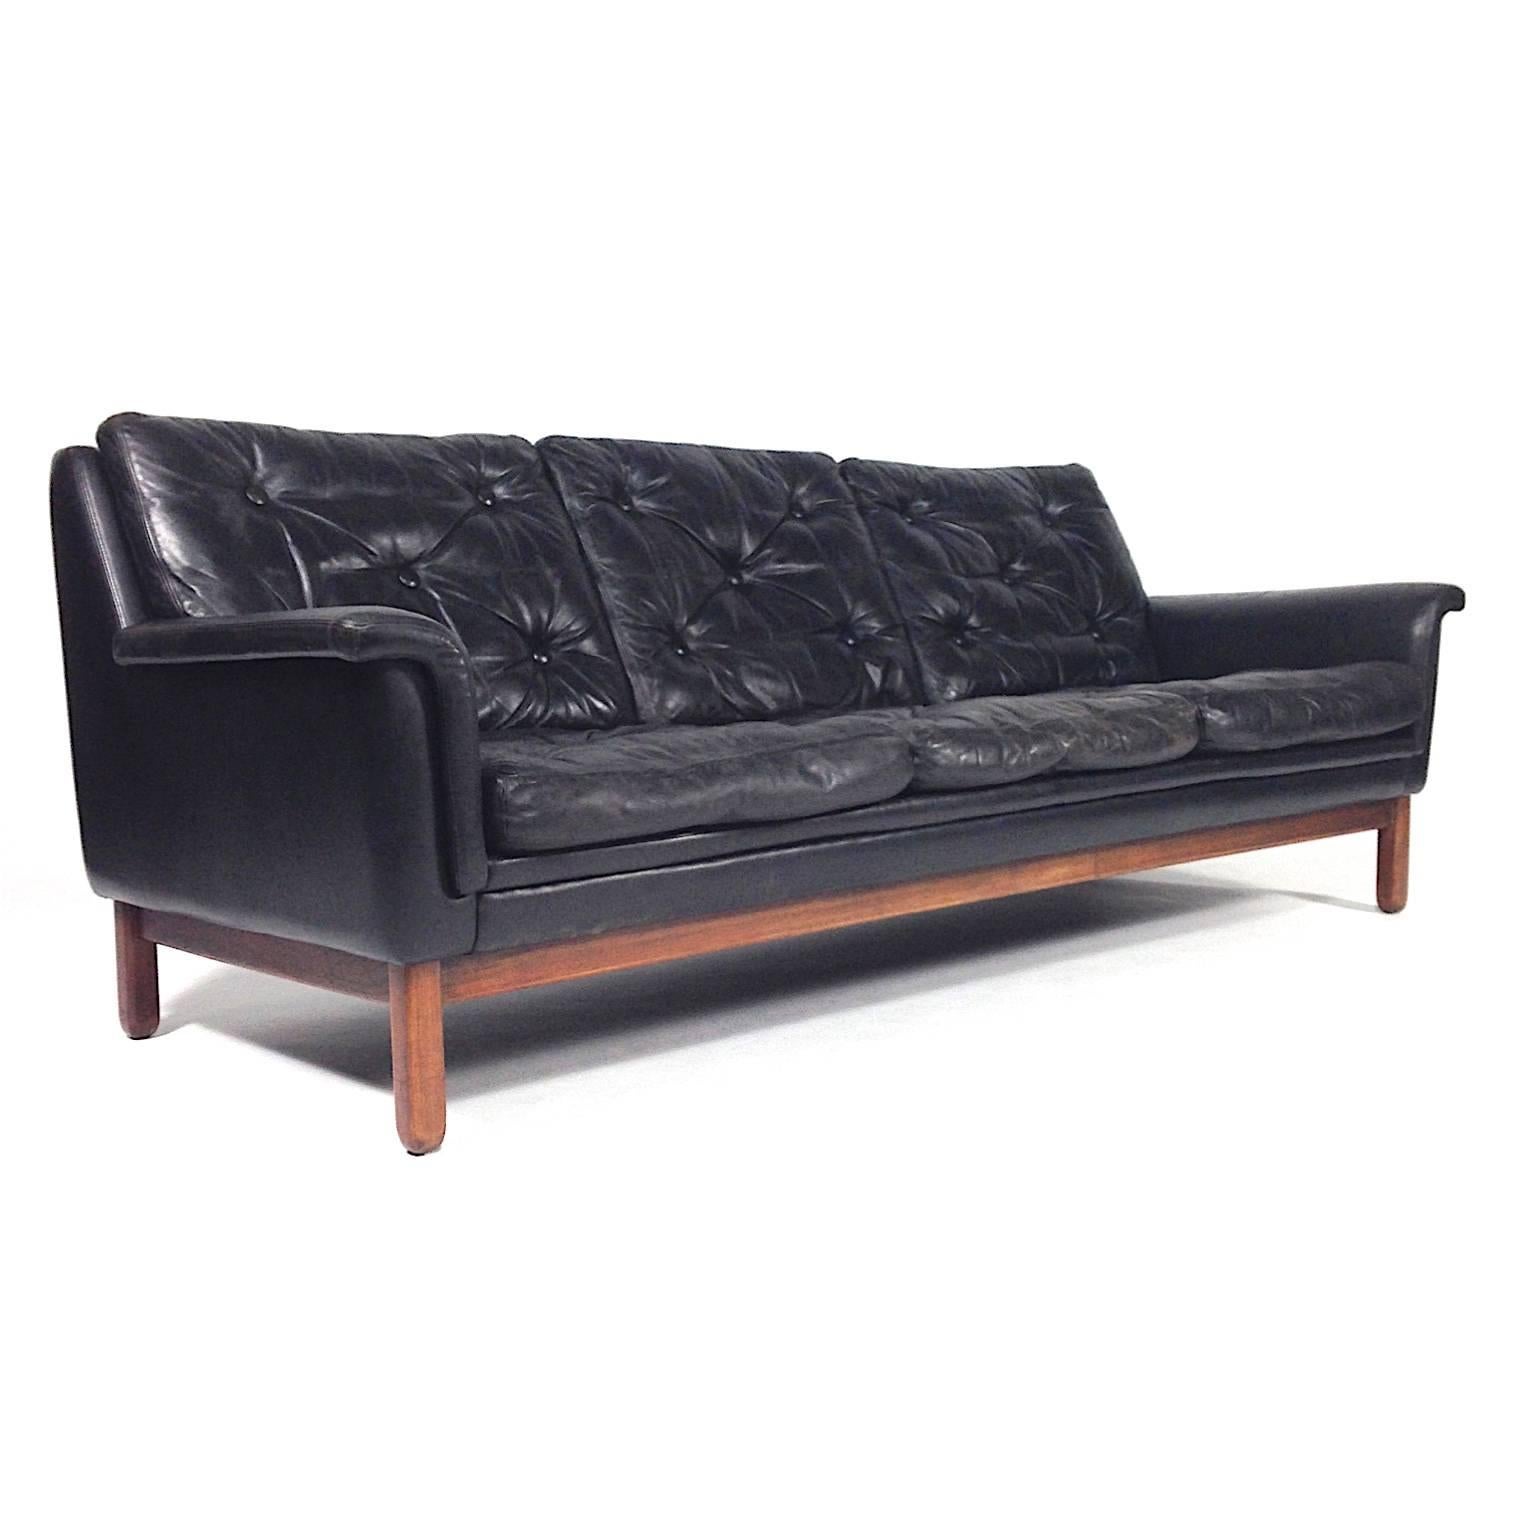 Vintage Scandinavian sofa in beautiful capitunated black leather, Denmark – circa 1950-1960.

The leather is still good condition with a beautiful patina.

In very good condition.

Designer: attributed to Hans Olsen

Model: 3-seat